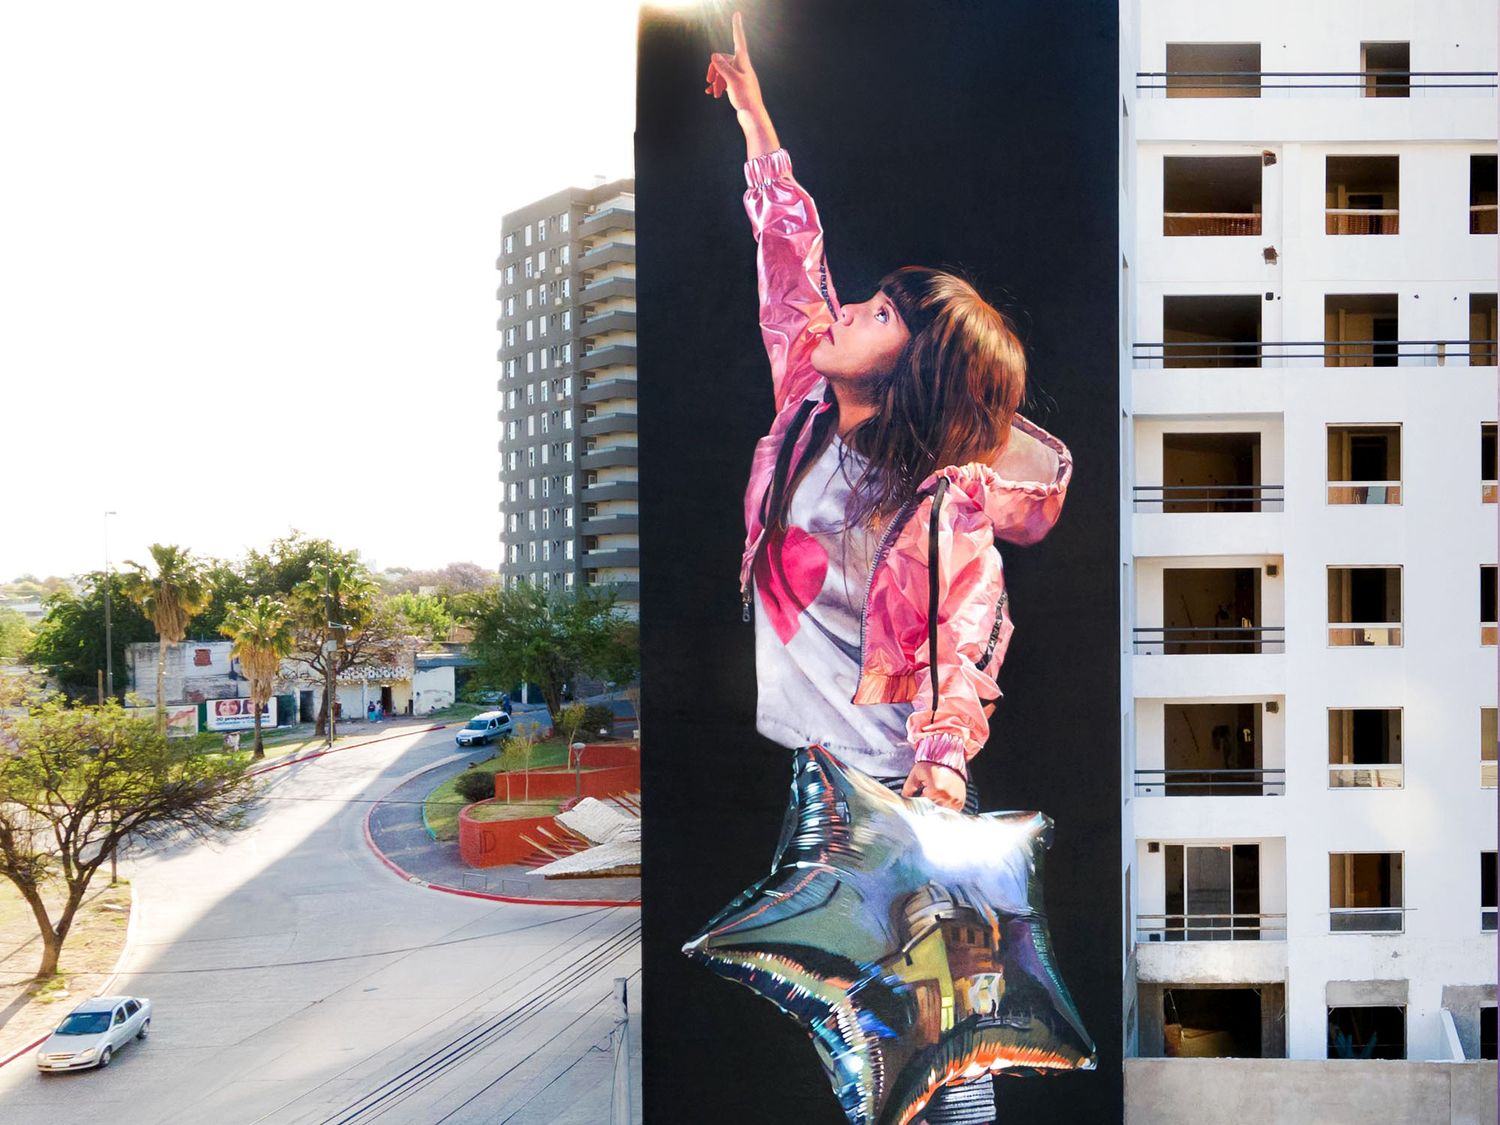 This mural named "Olivia looks at the sky" was made to remind us that the Astronomical Center of Córdoba was founded 150 years ago, from which the district gets its name (©Joaquin Caba).